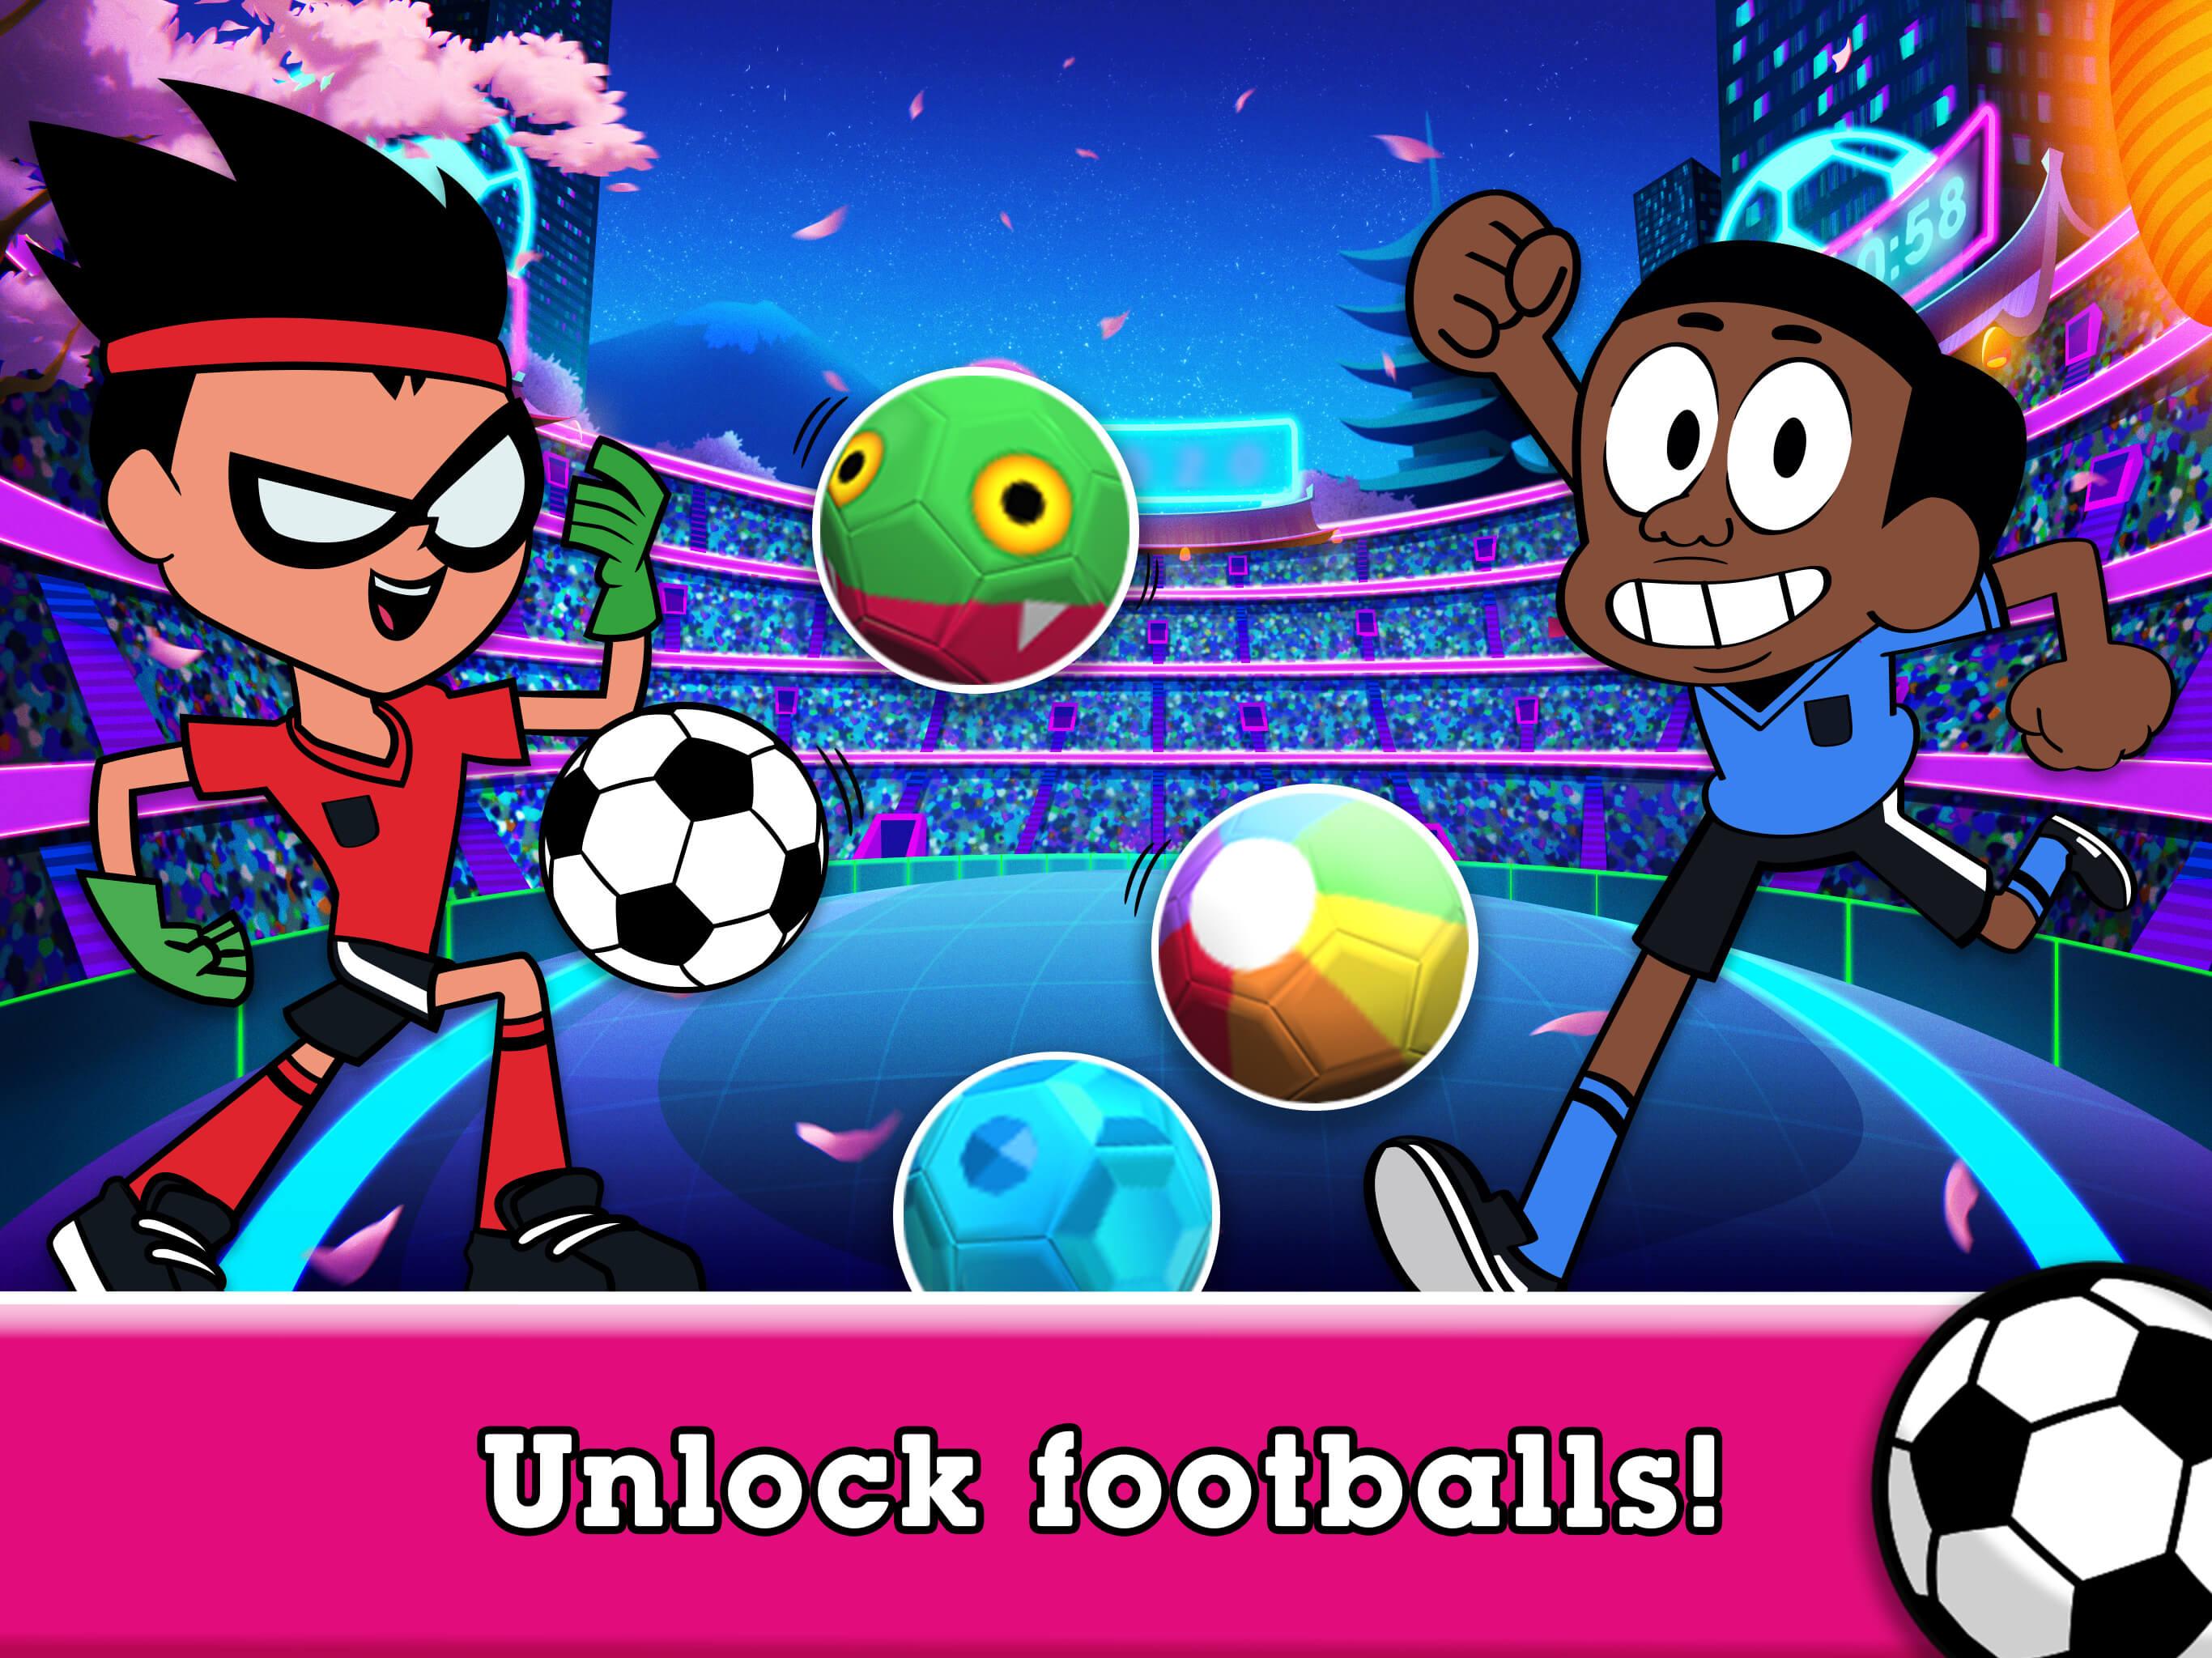 Toon Cup 2021 for Android - APK Download